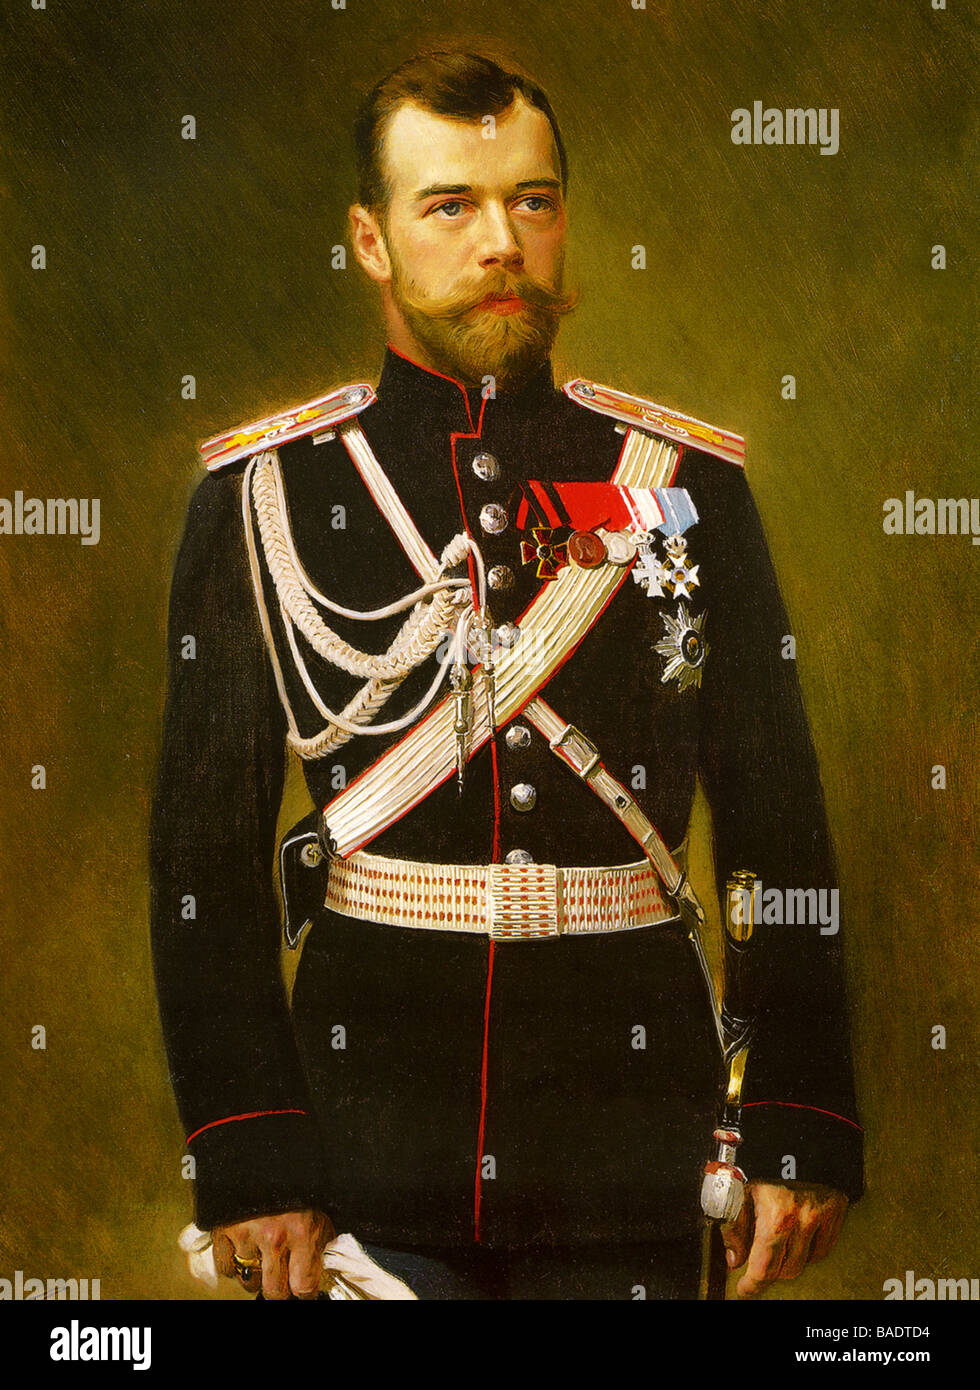 Tsarist military in uniform with a saber Postcard from the times of tsarist Russia